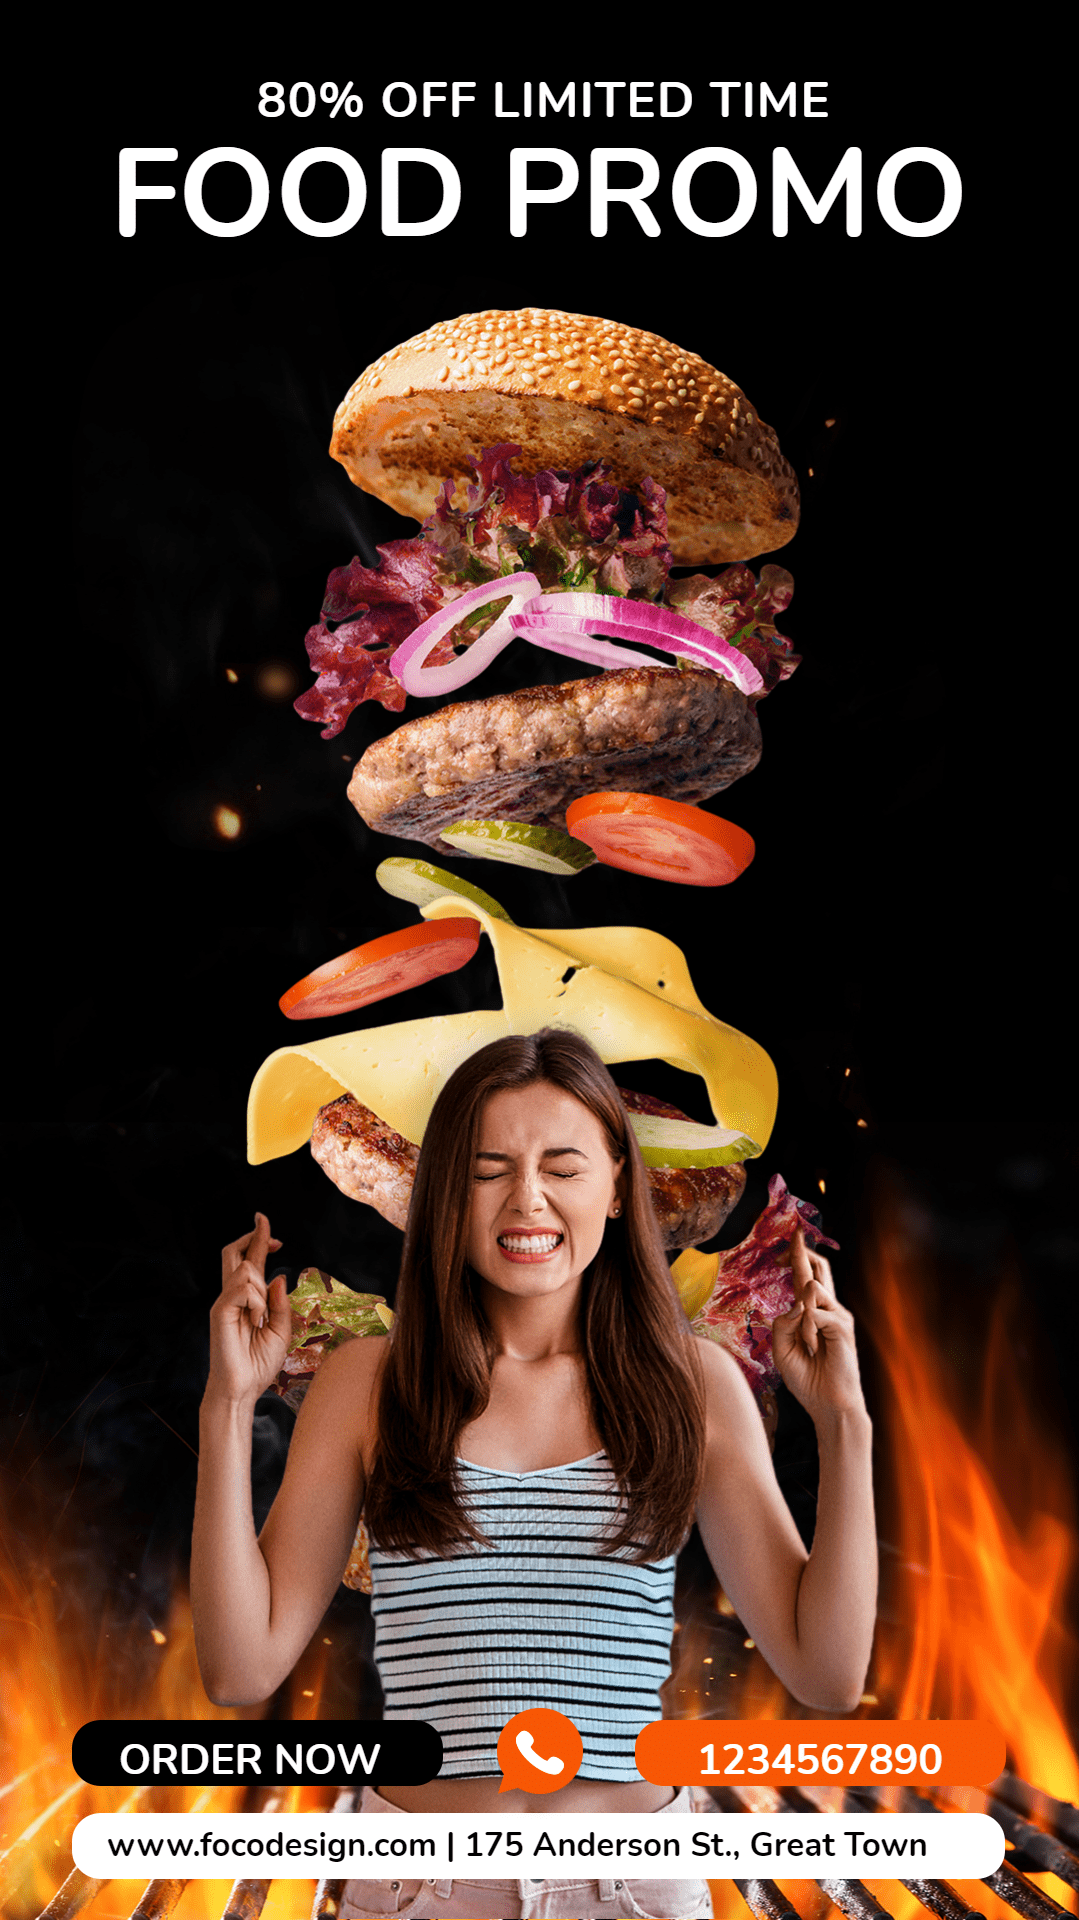 Burger Fast Food Discount Sale Promo Creative Campaign Ecommerce Story预览效果